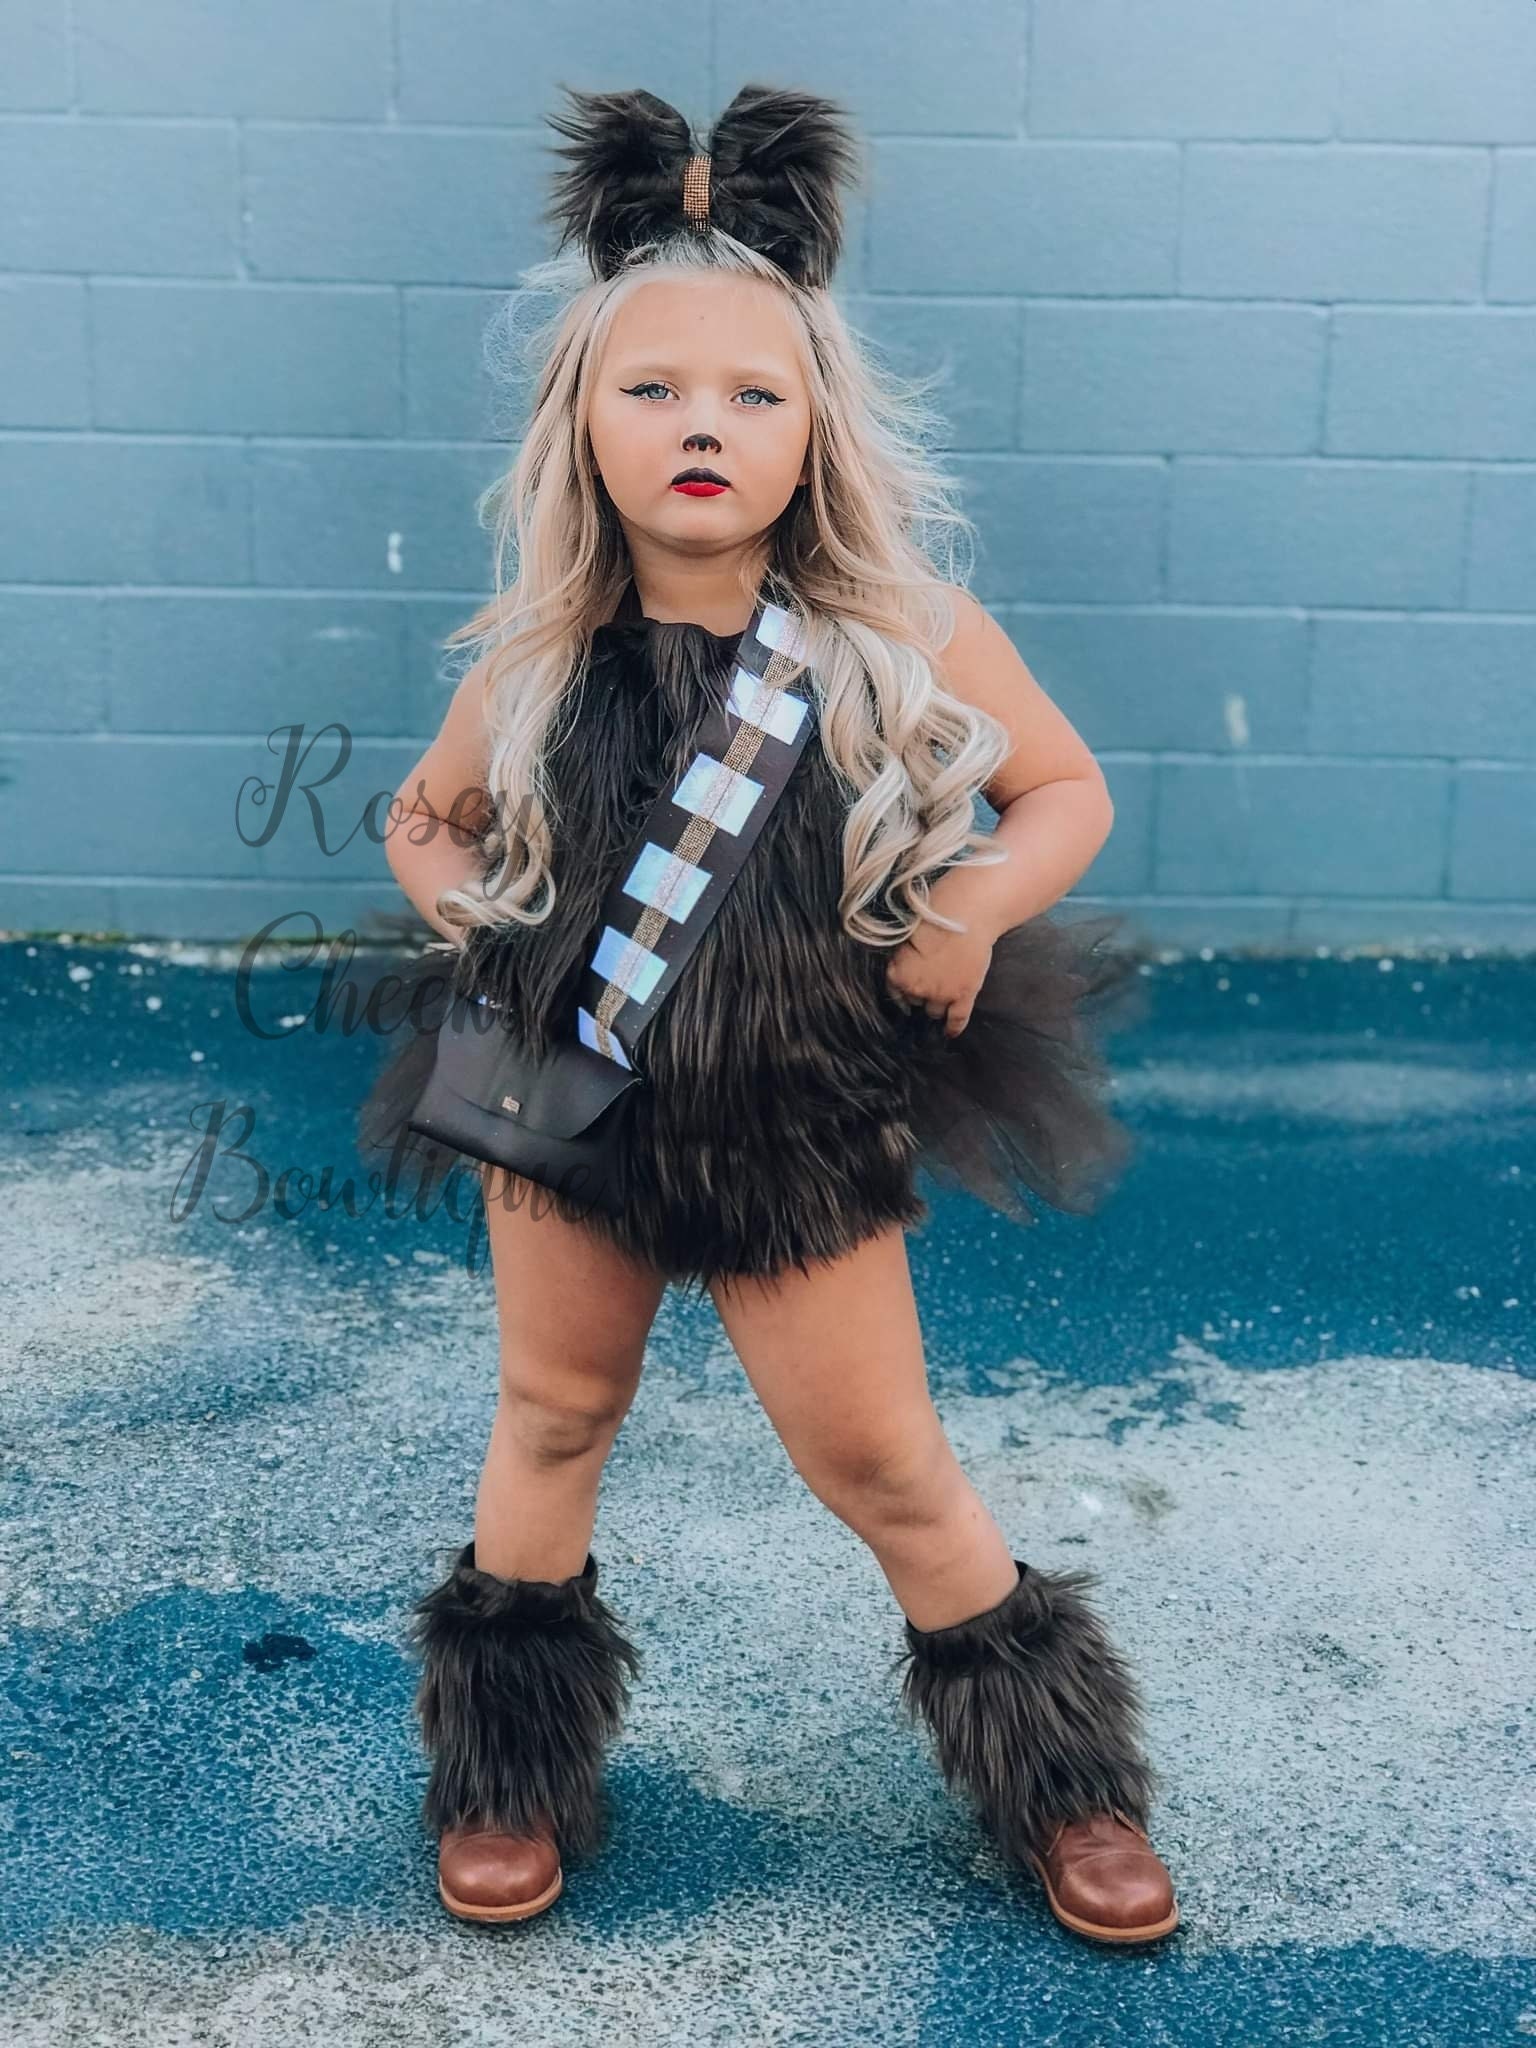 Chewbacca Star Wars Costume Photo Shoot Pageant Baby Toddler pic